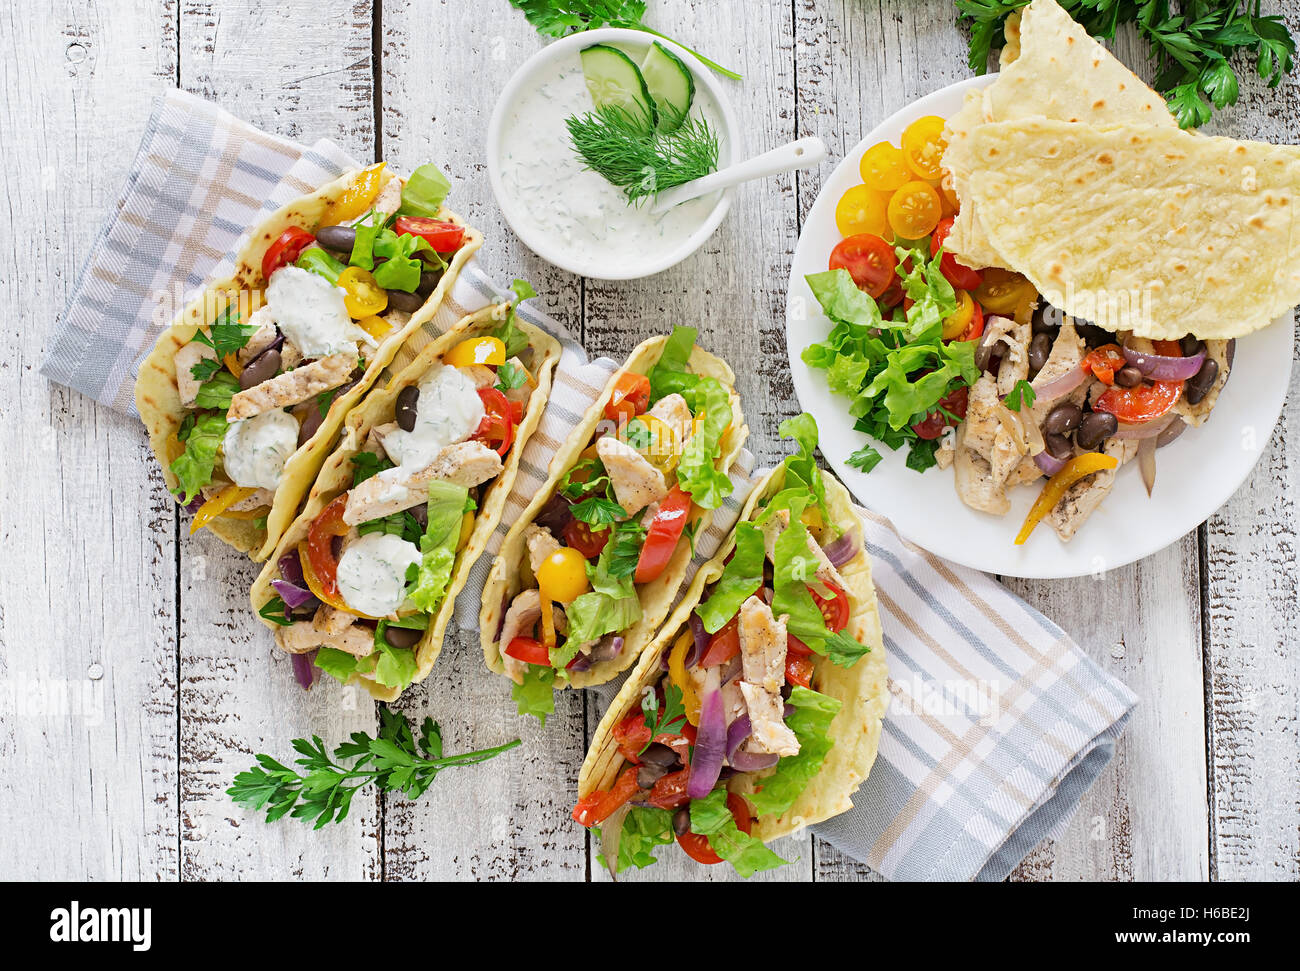 Mexican tacos with chicken, bell peppers, black beans and fresh vegetables and tartar sauce. Top view Stock Photo